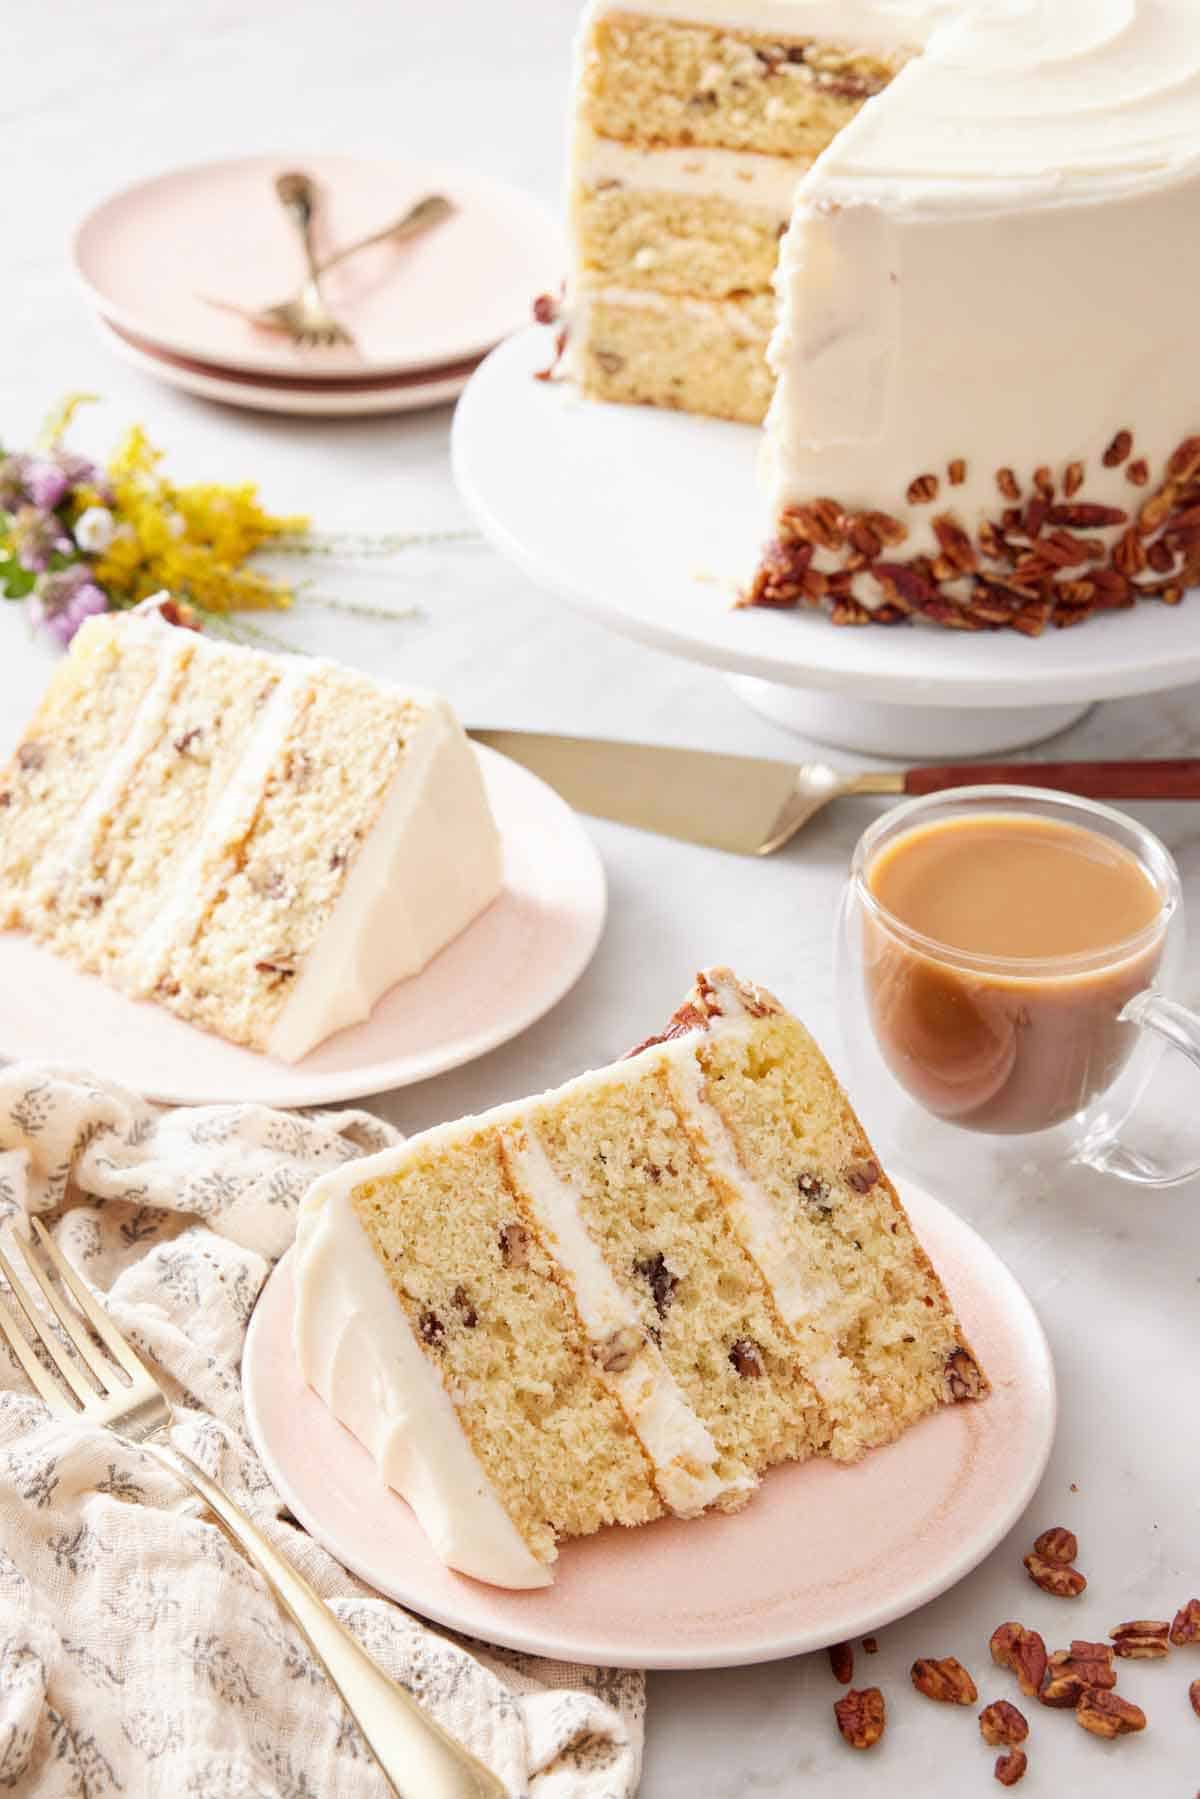 Two plated slices of butter pecan cake with the rest of the cake on a cake stand in the background with a glass of coffee.